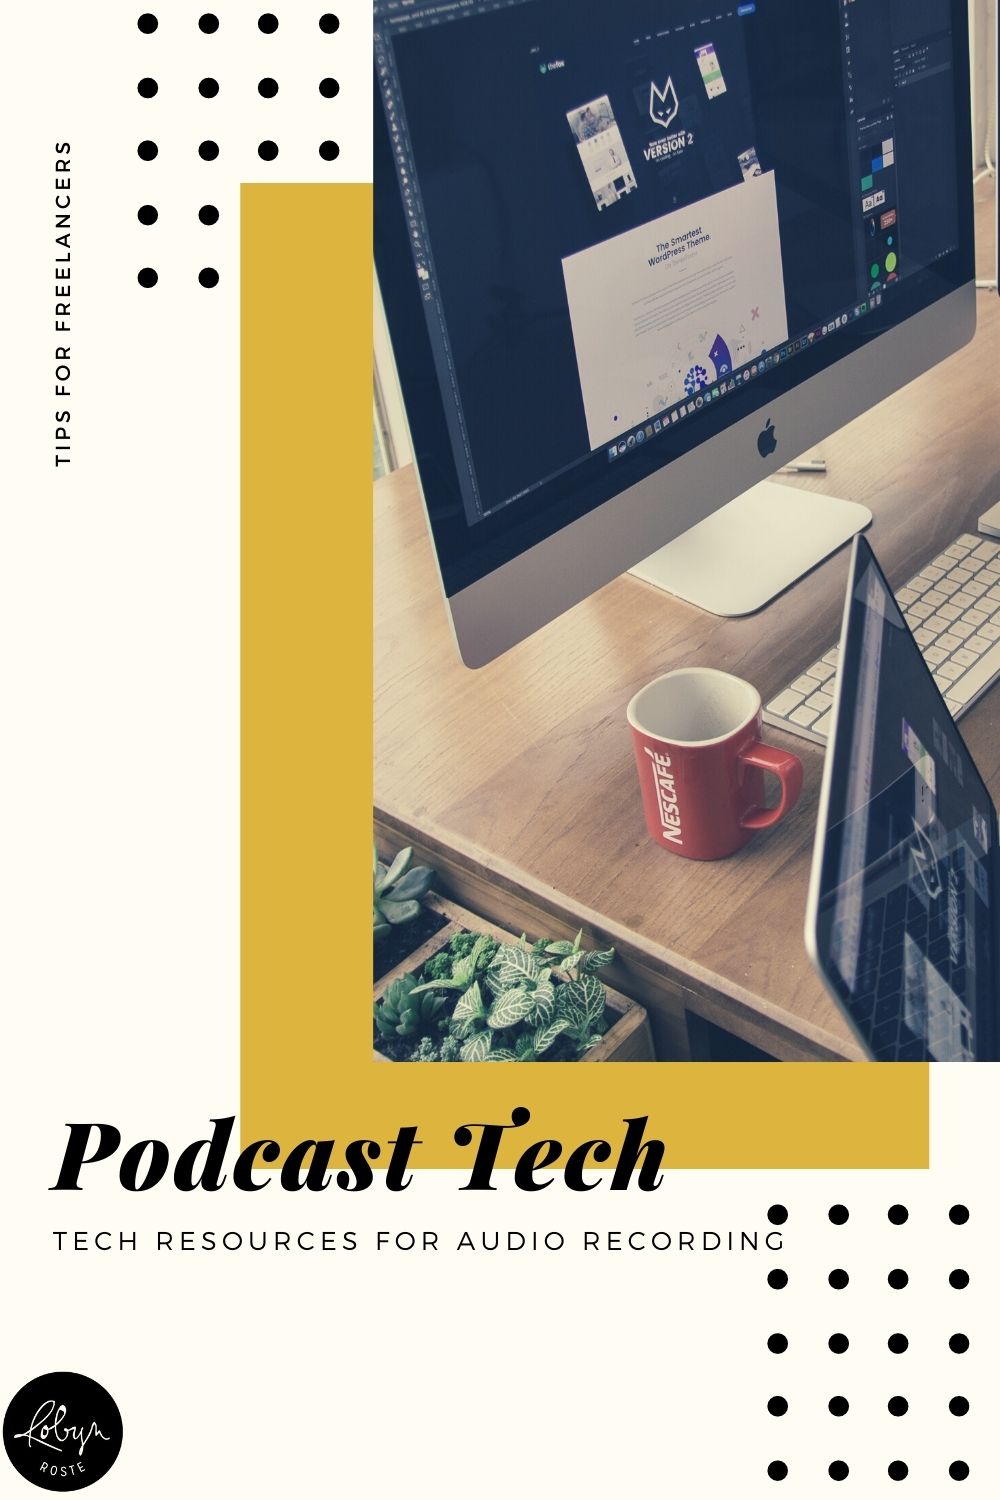 Want to start a radio show but feel limited/overwhelmed by the tech resources for podcasting and audio recording? I feel you. But here's the thing, it's SO accessible these days if you want to do it, then do it.